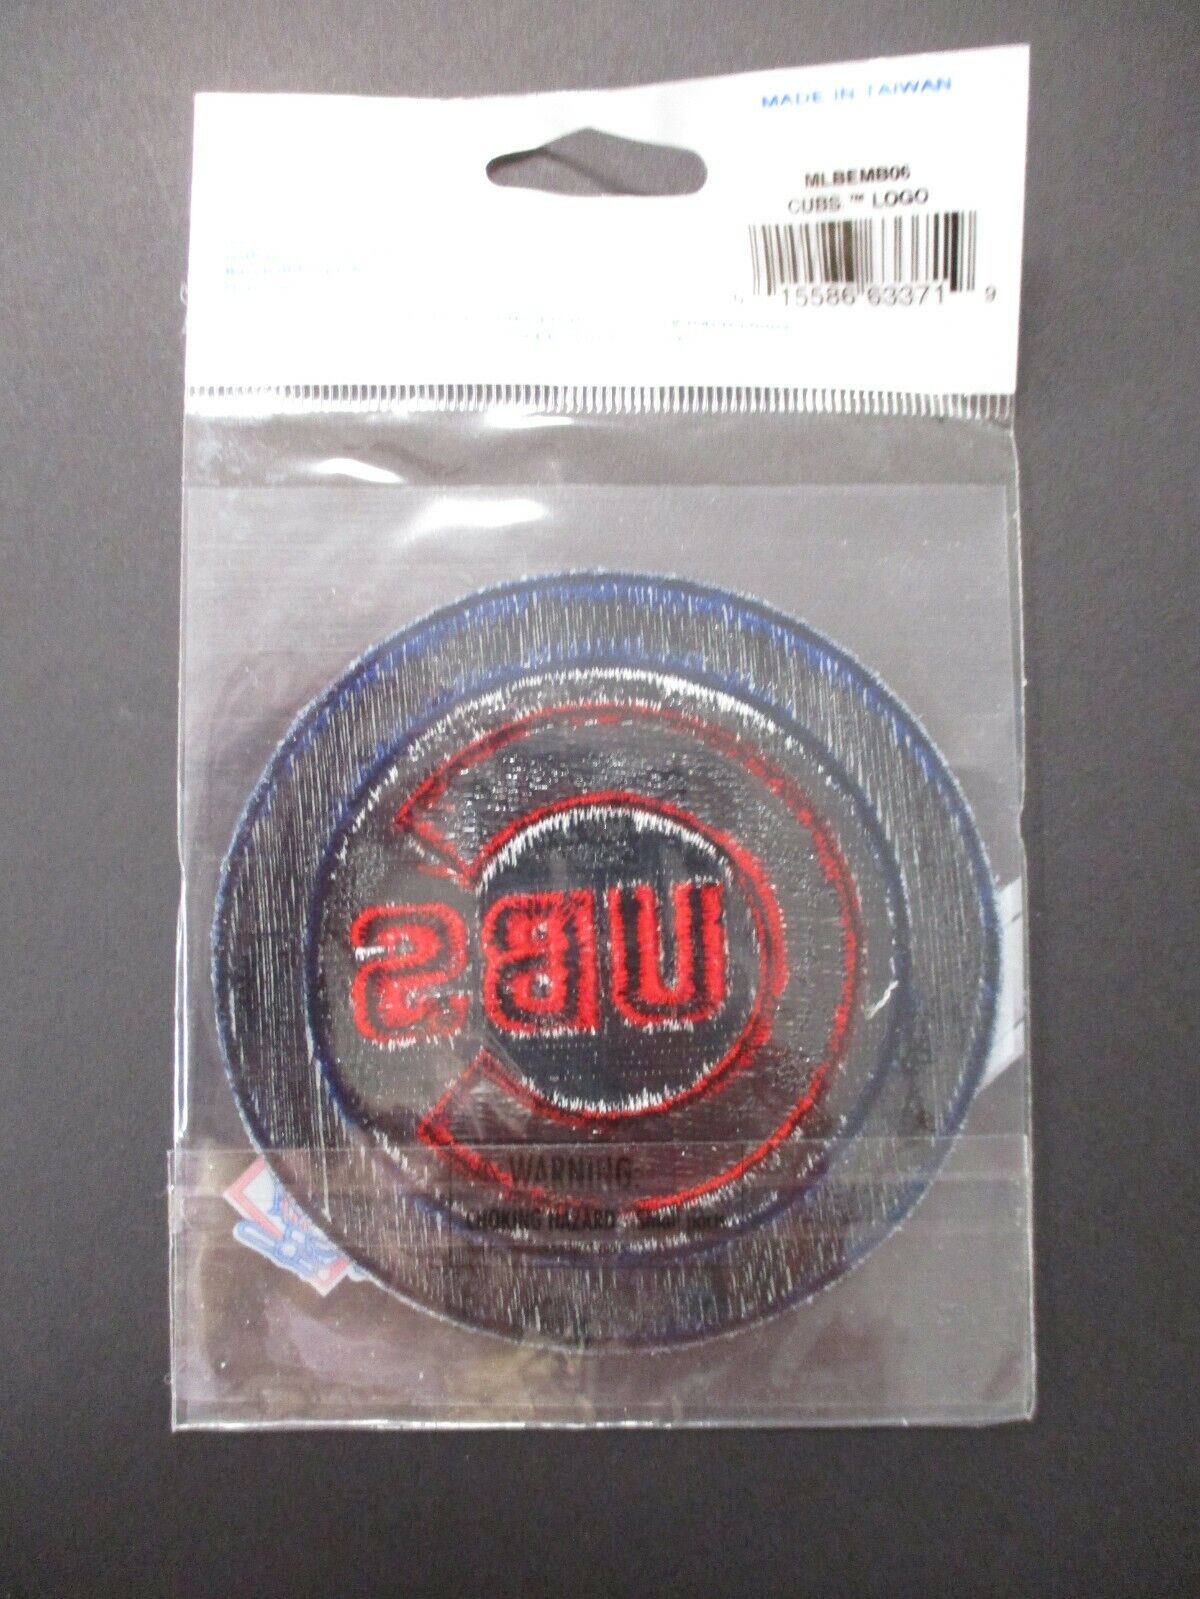 Chicago Cubs MLB patch size 3.5 x 3.5 inches New in Bag EK Success